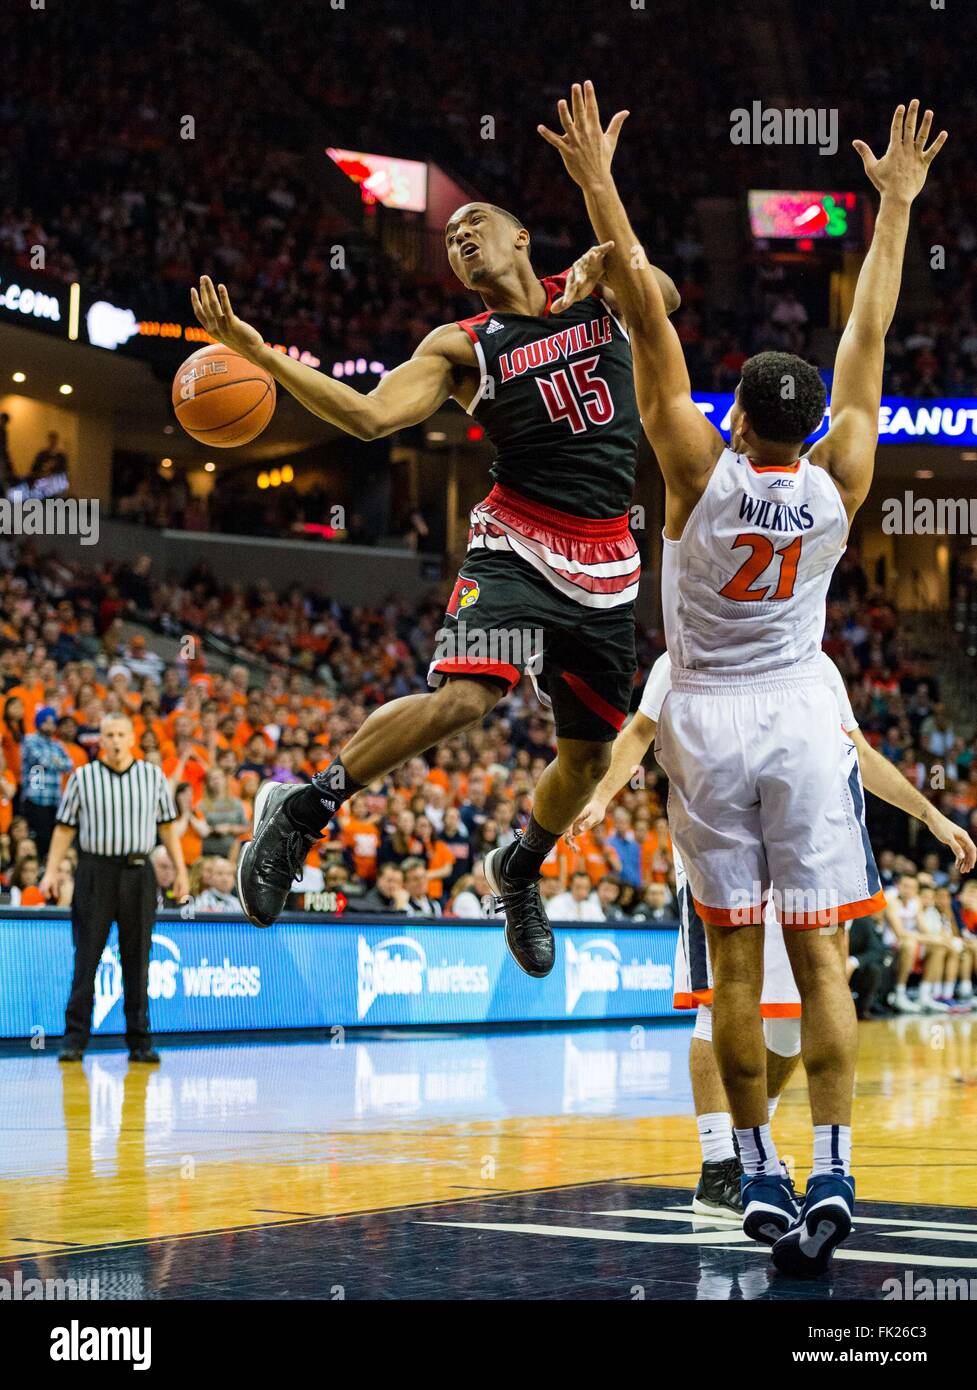 Louisville guard Donovan Mitchell (45) during the NCAA Basketball game between the Louisville Cardinals and the Virginia Cavaliers at the John Paul Jones Arena on March 5, 2016 in Charlottesville, VA. Jacob Kupferman/CSM Stock Photo